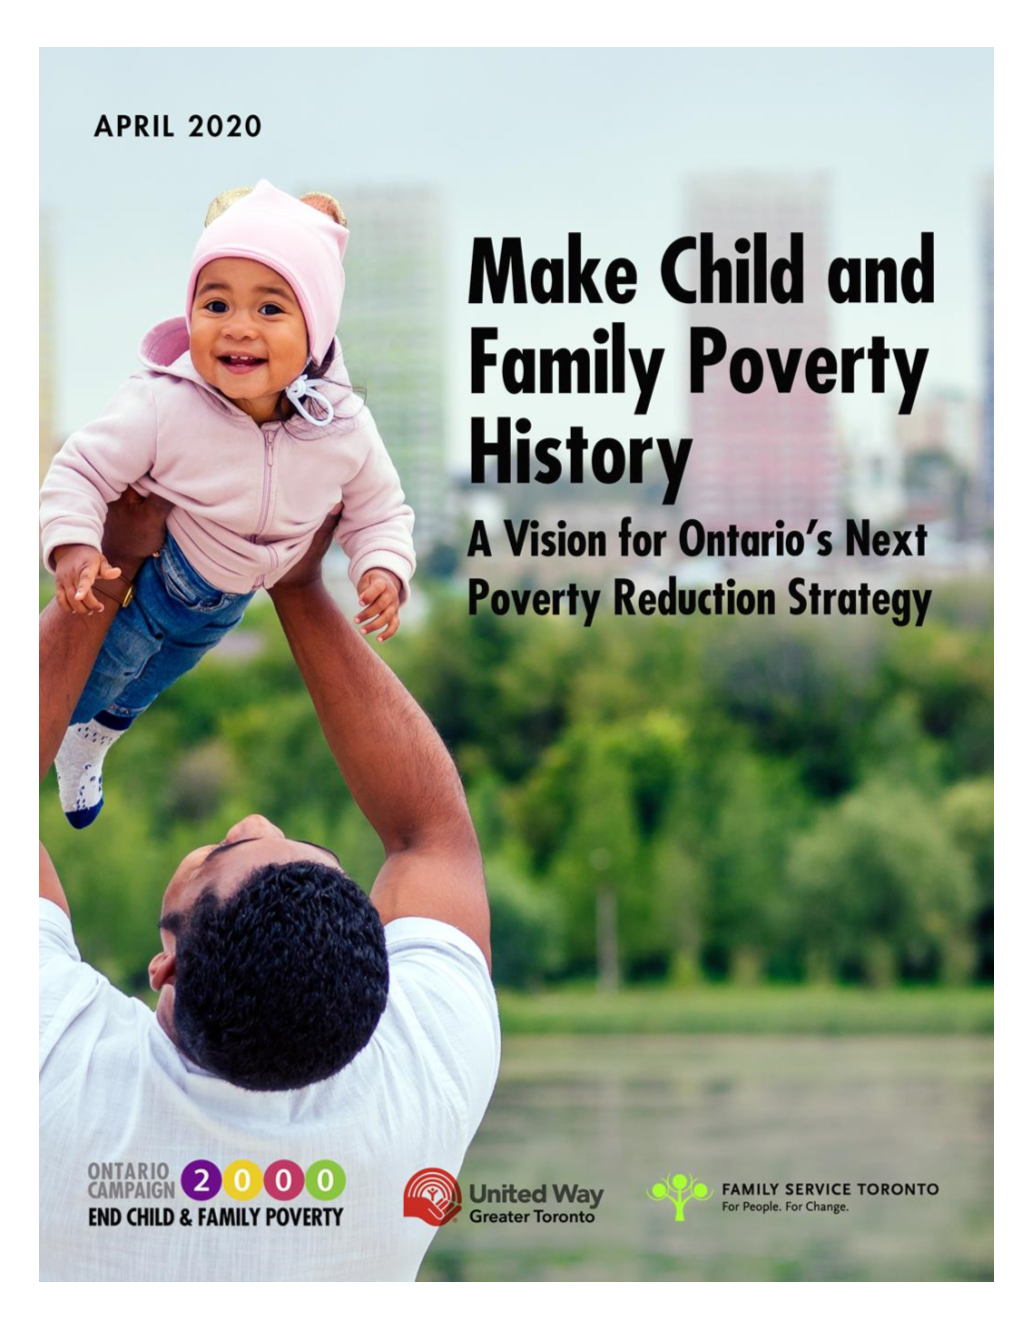 April 2020 Report on Child Poverty